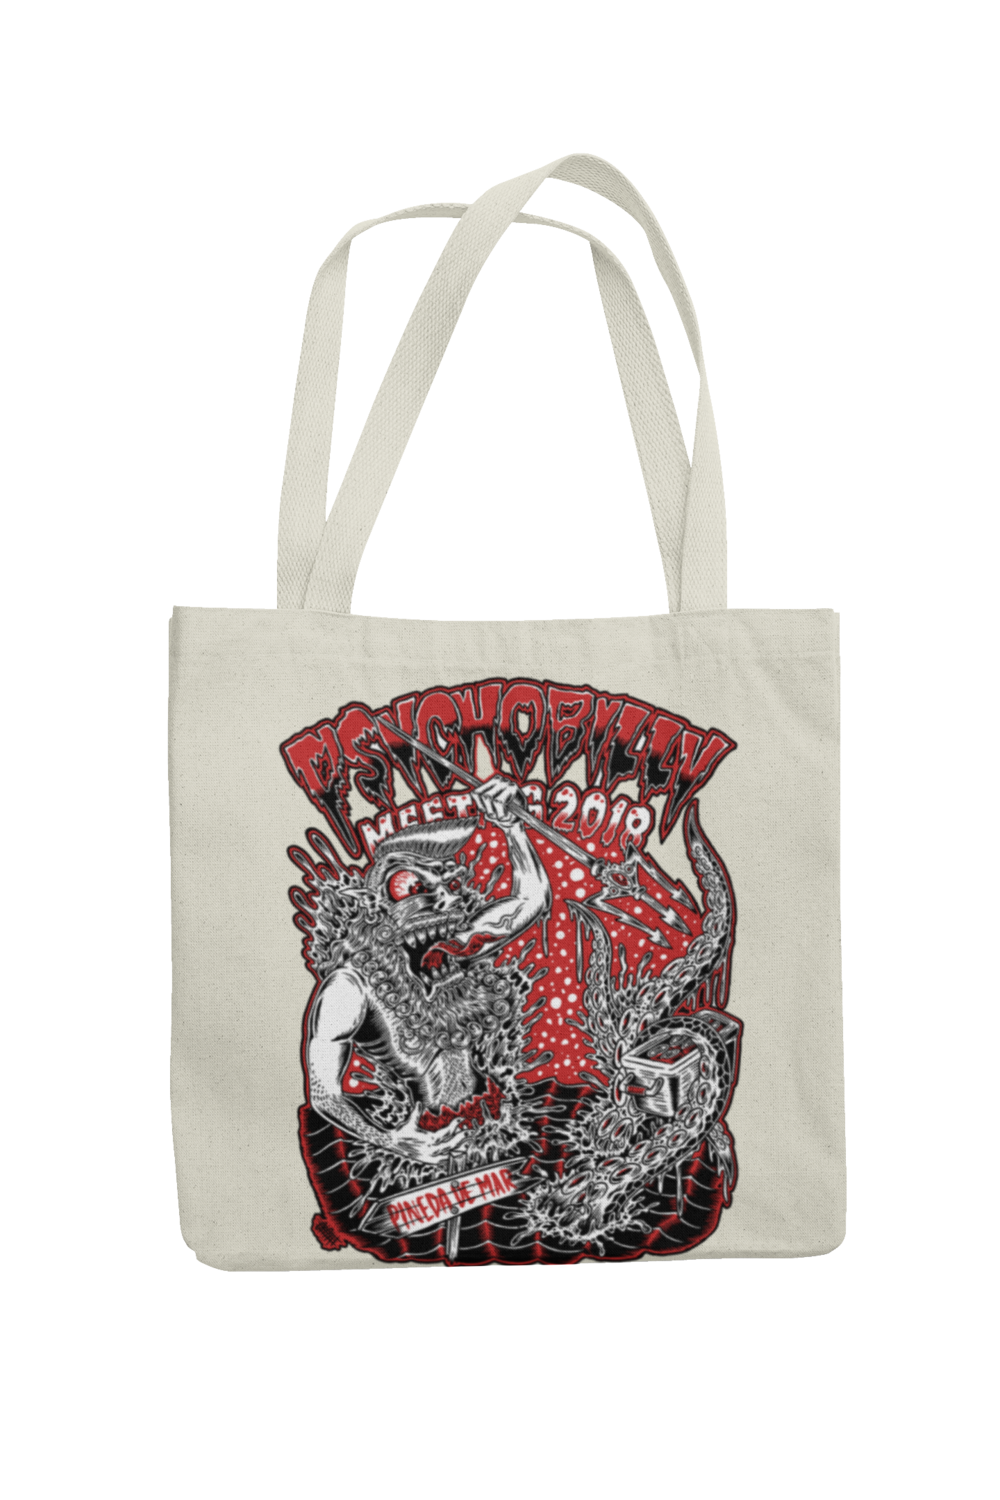 Cotton Bag Psychobilly meeting design by Olafh 2018